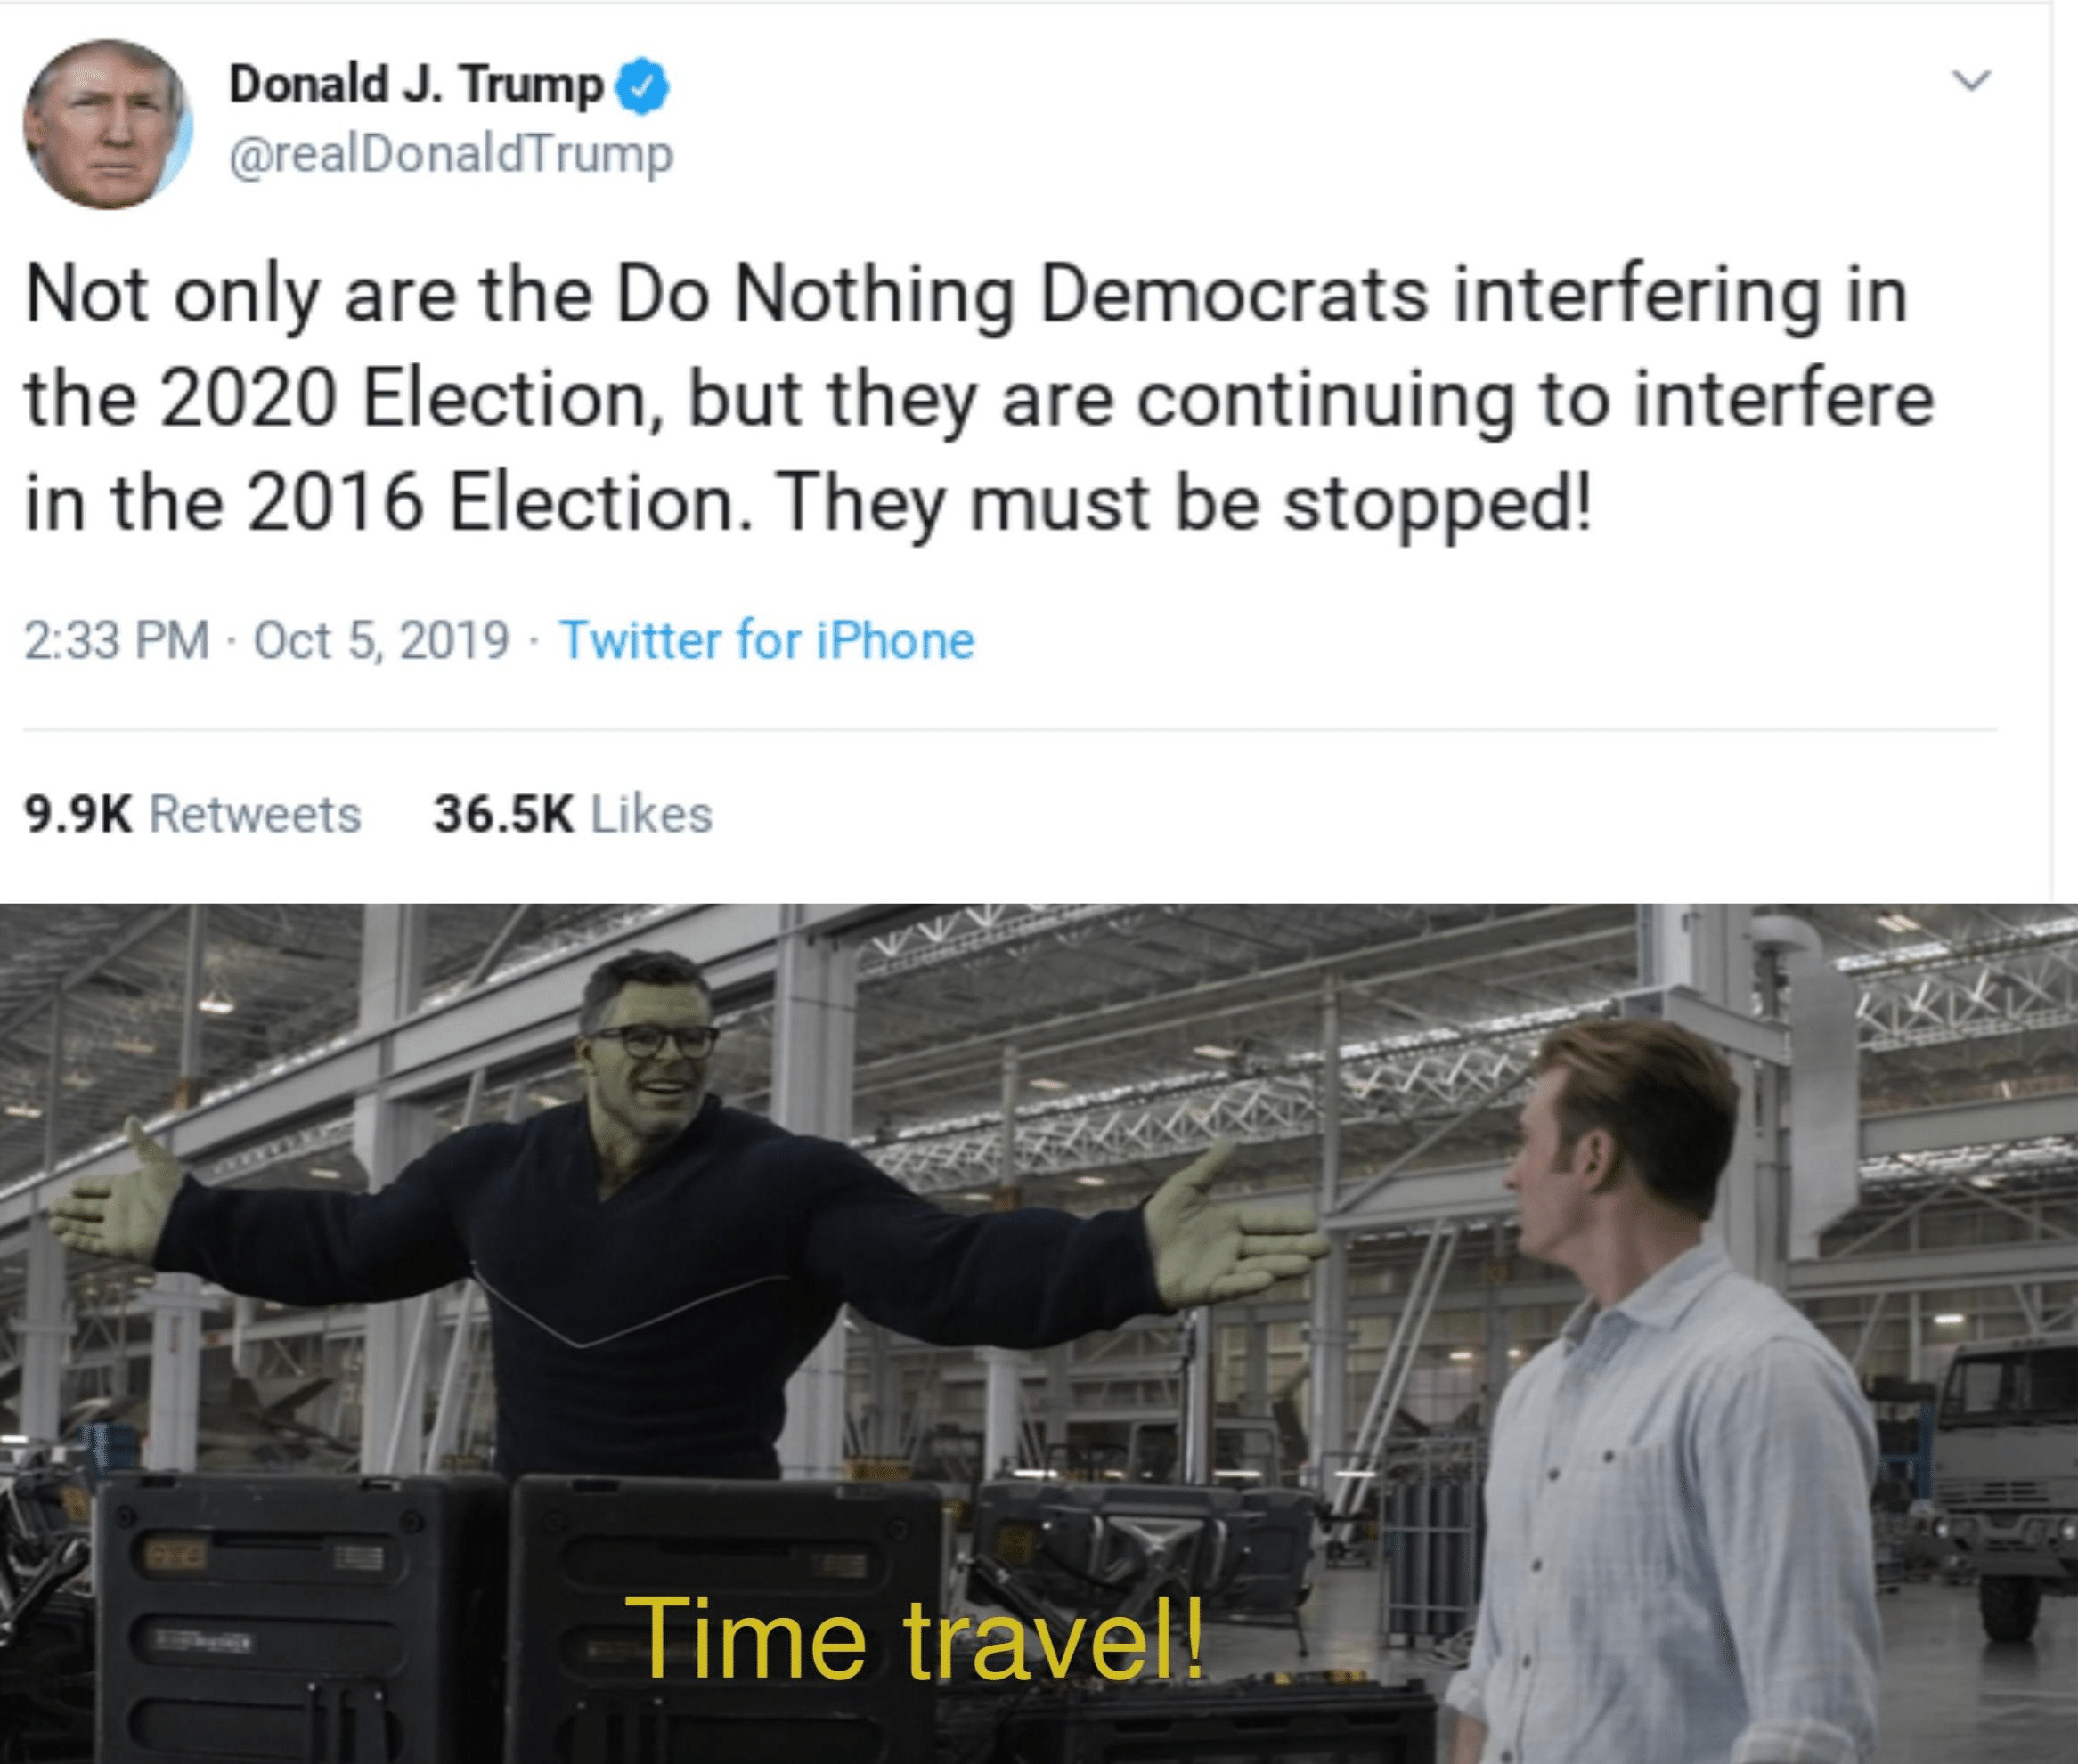 political political-memes political text: Donald J. Trump @realDonaldTrump Not only are the Do Nothing Democrats interfering in the 2020 Election, but they are continuing to interfere in the 2016 Election. They must be stopped! 2:33 PM Oct 5, 2019 Twitter for iPhone Likes 9.9K 36.5K Time travel! 